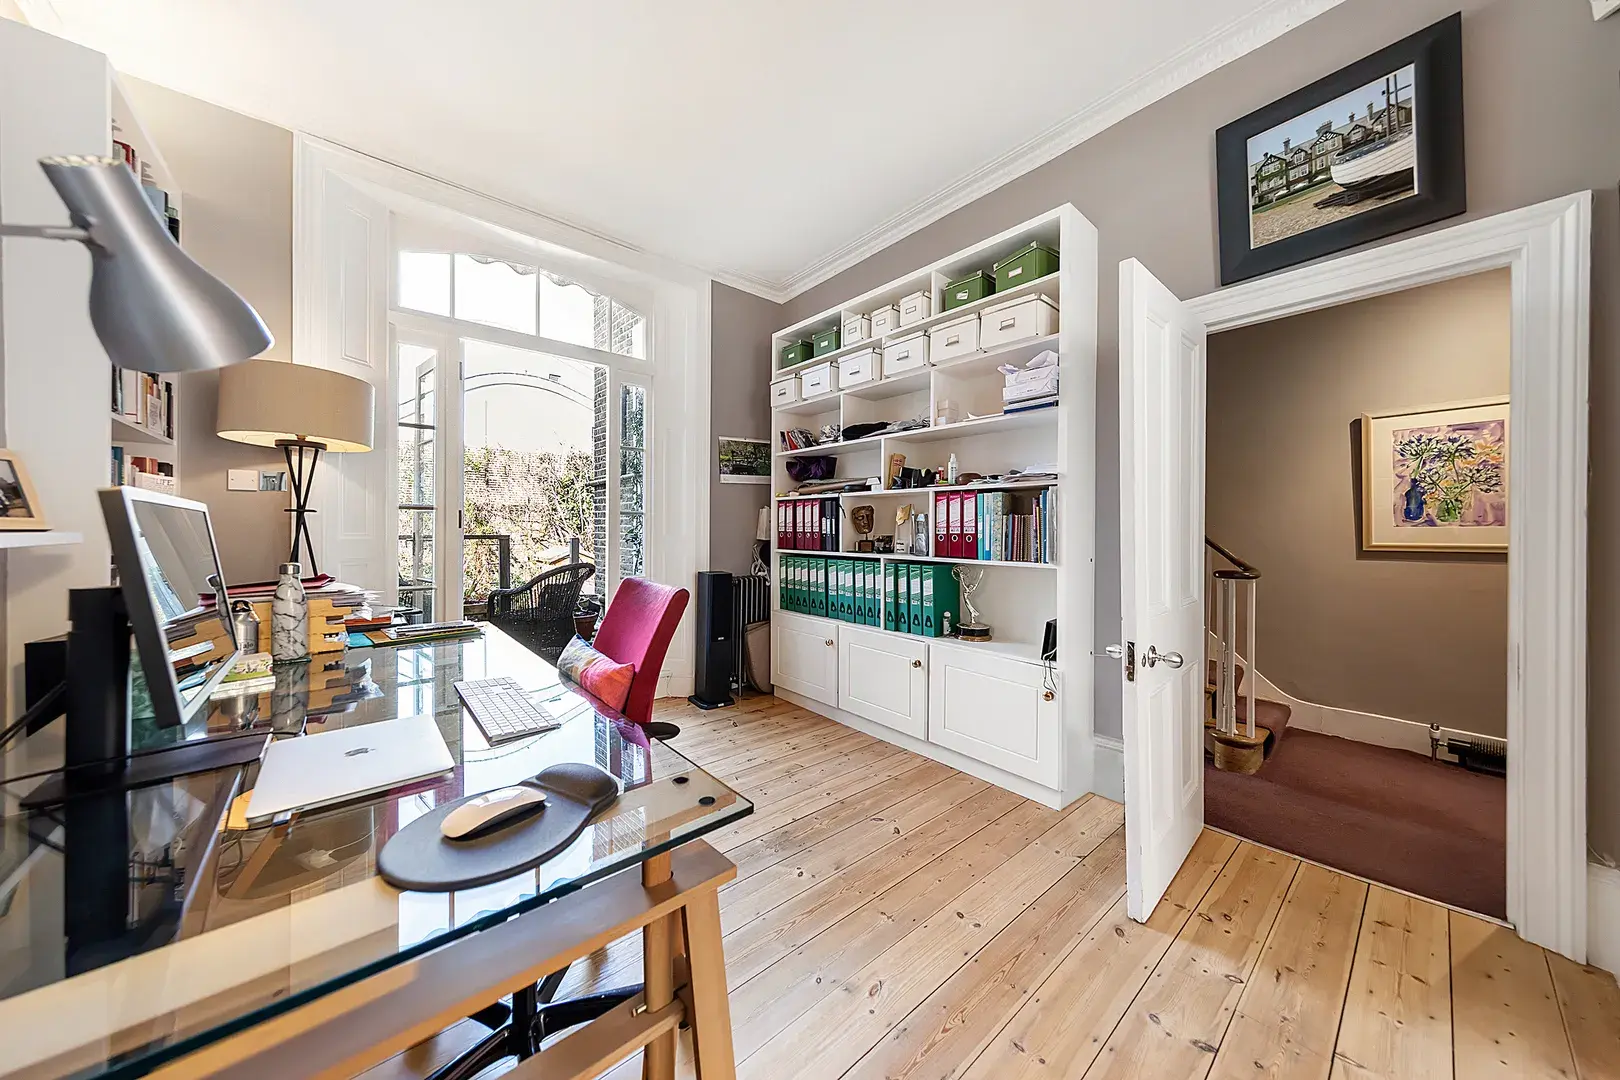 Devonia Road, holiday home in Islington, London